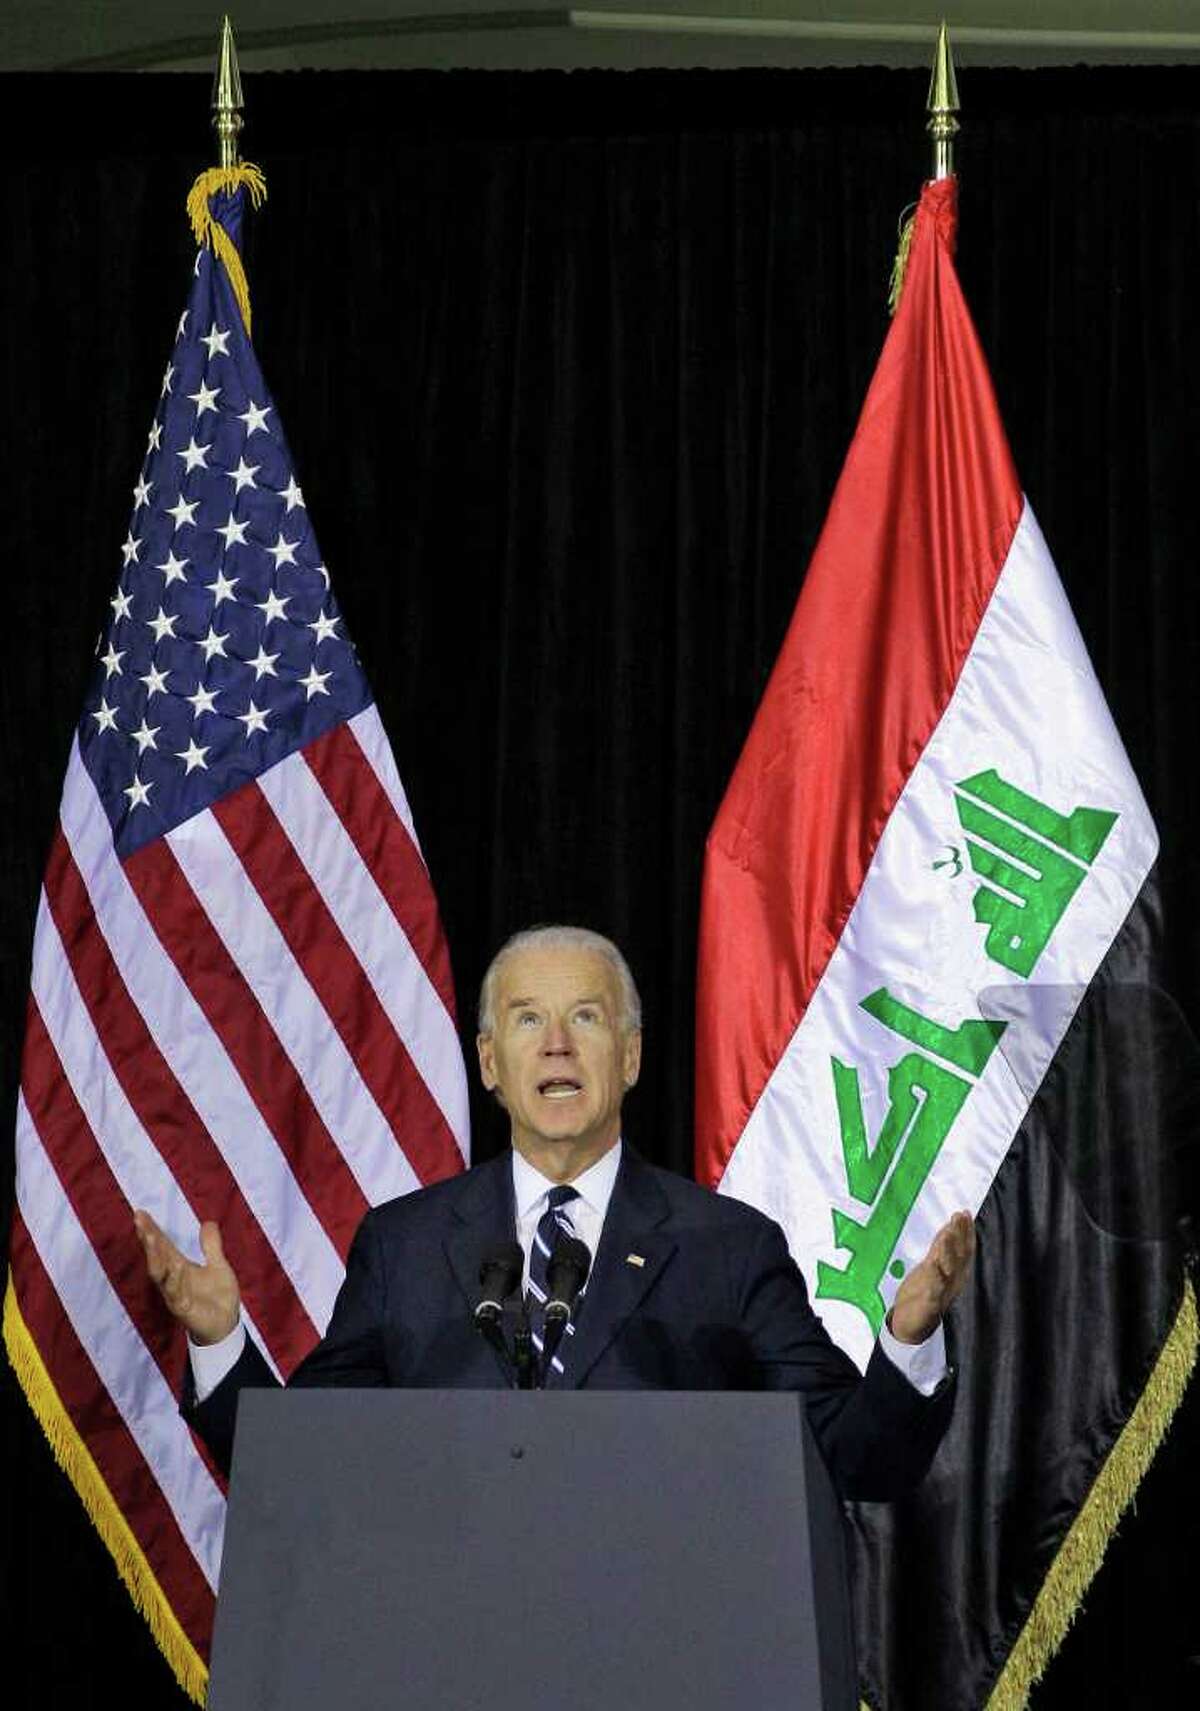 U.S. Vice President Joe Biden speaks during a special ceremony at Camp Victory, one of the last American bases in this country where the U.S. military footprint is swiftly shrinking in Baghdad, Iraq, Thursday, Dec. 1, 2011. Vice President Joe Biden thanked U.S. and Iraqi troops for sacrifices that he said allowed for the end of the nearly nine-year-long war, even as attacks around the country killed 20 people, underscoring the security challenges Iraq still faces. (AP Photo/Khalid Mohammed)